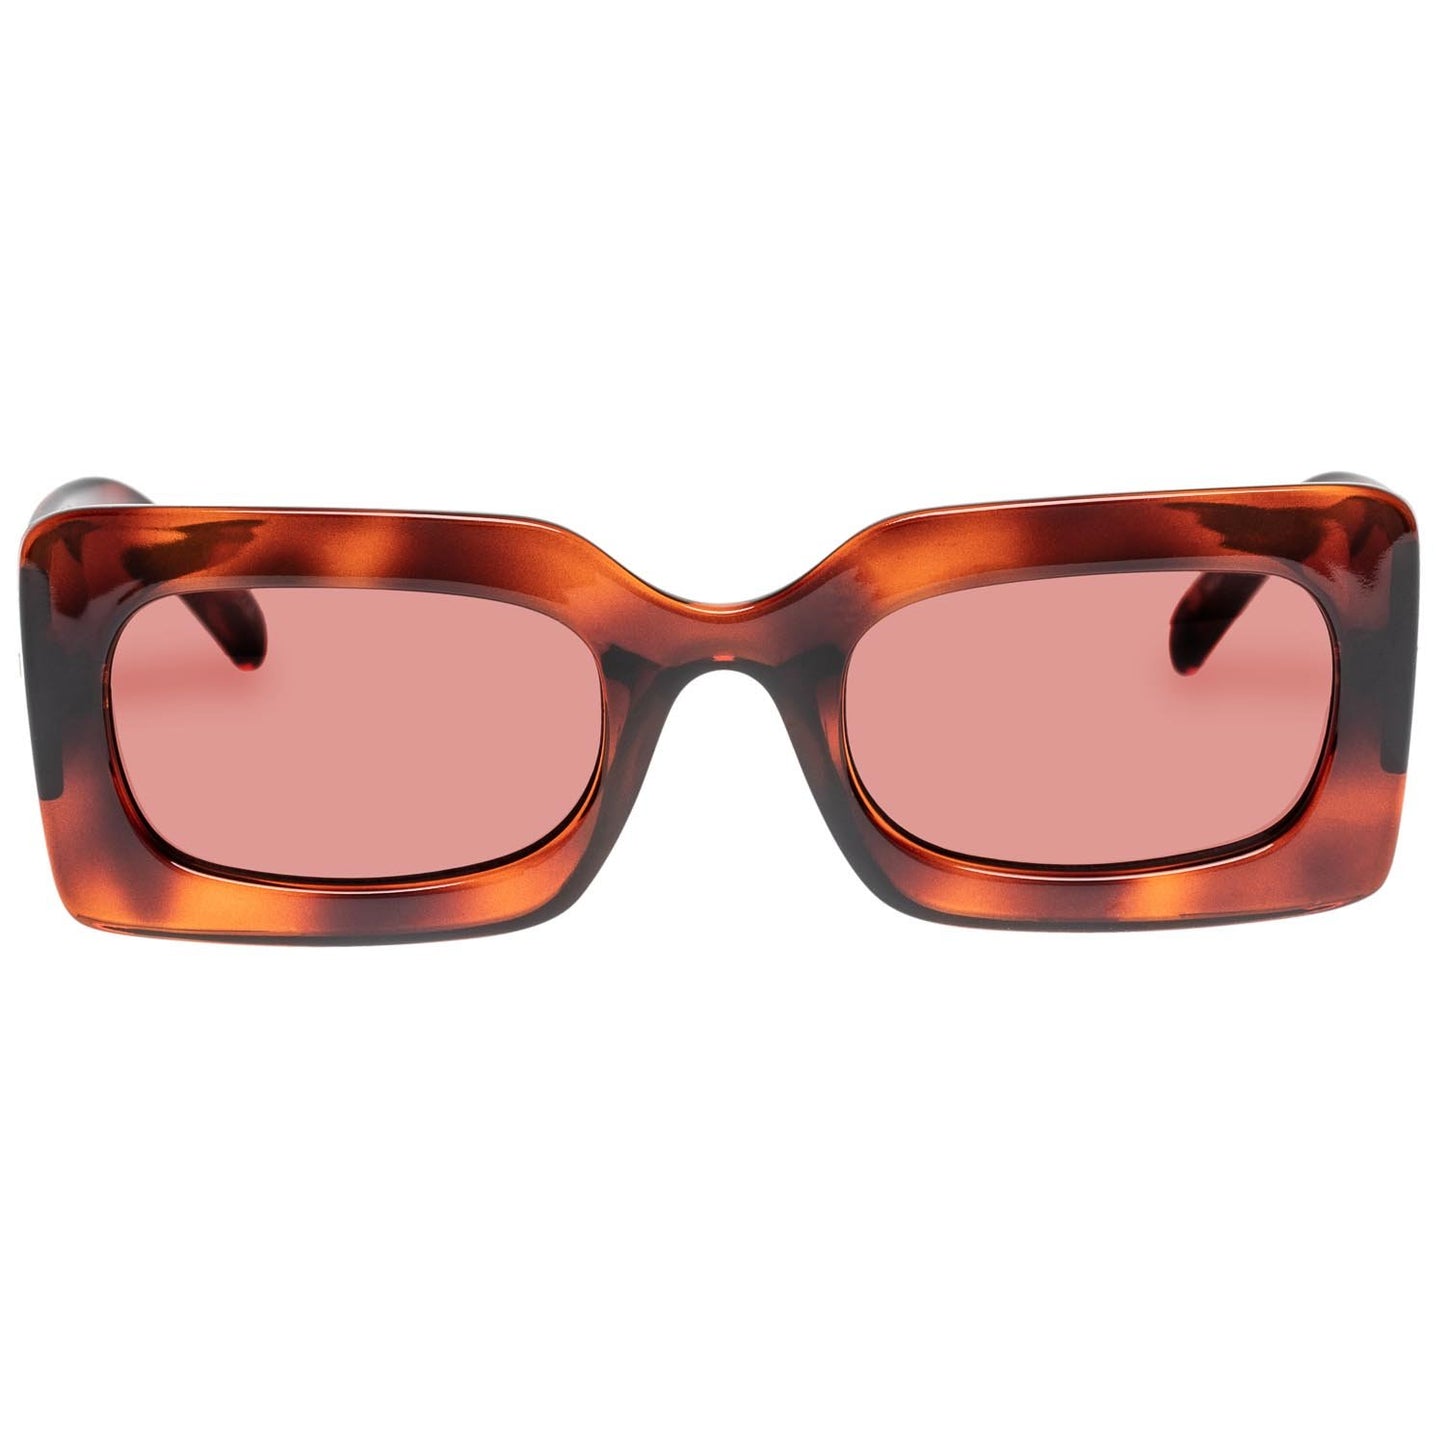 LE SPECS // Oh Damn! TOFFEE TORT